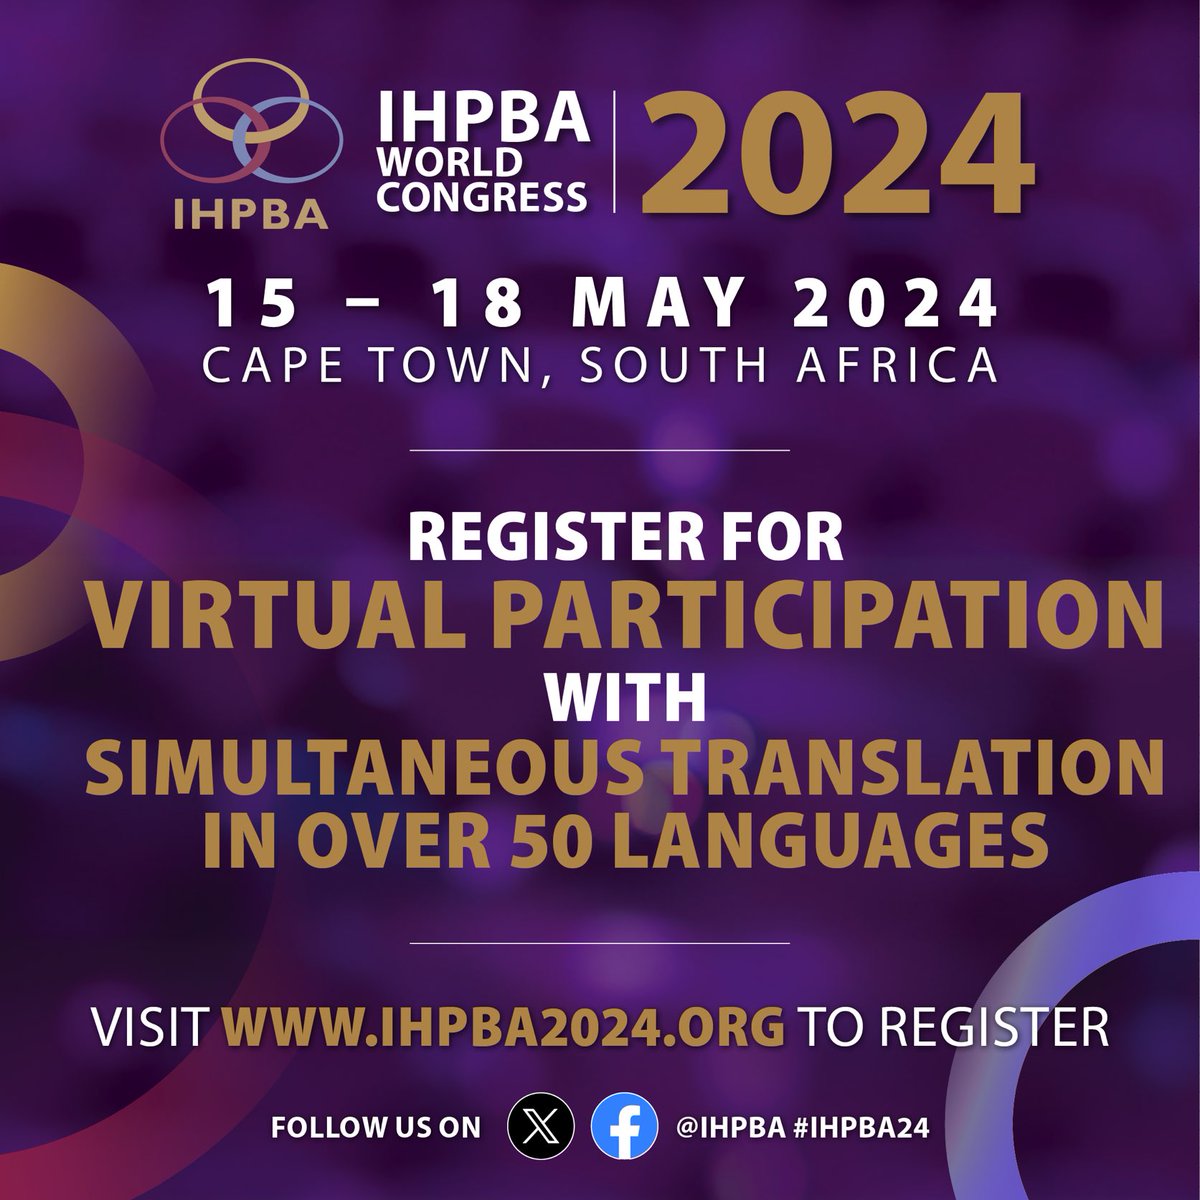 Great opportunity for those who cannot attend in person. Saves a lot of #footprint too, attending virtually (though missing the live chats and interactions in between and after sessions) ⁦@EAHPBA⁩ ⁦@IHPBA⁩ #ihpba2024